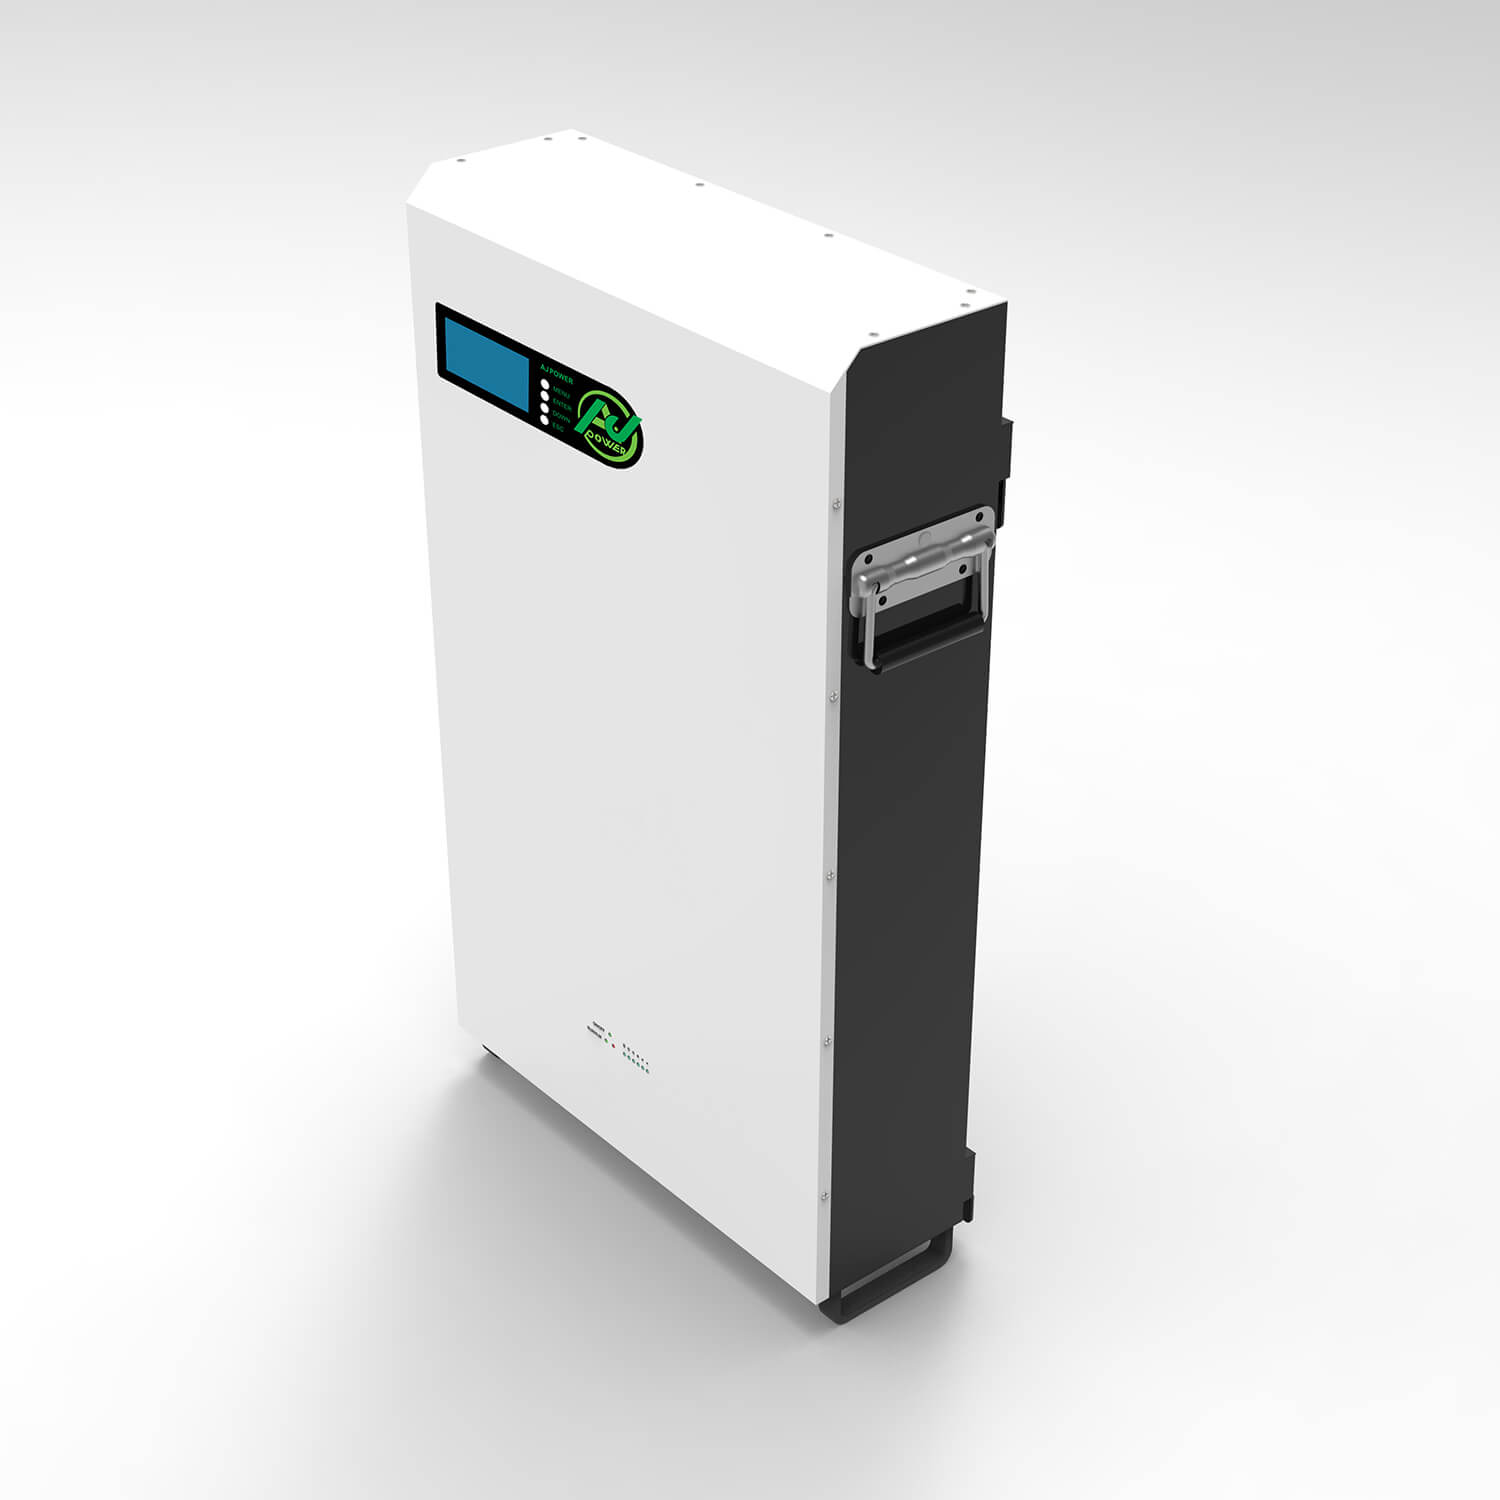 7kWh all-in-one home energy storage unit